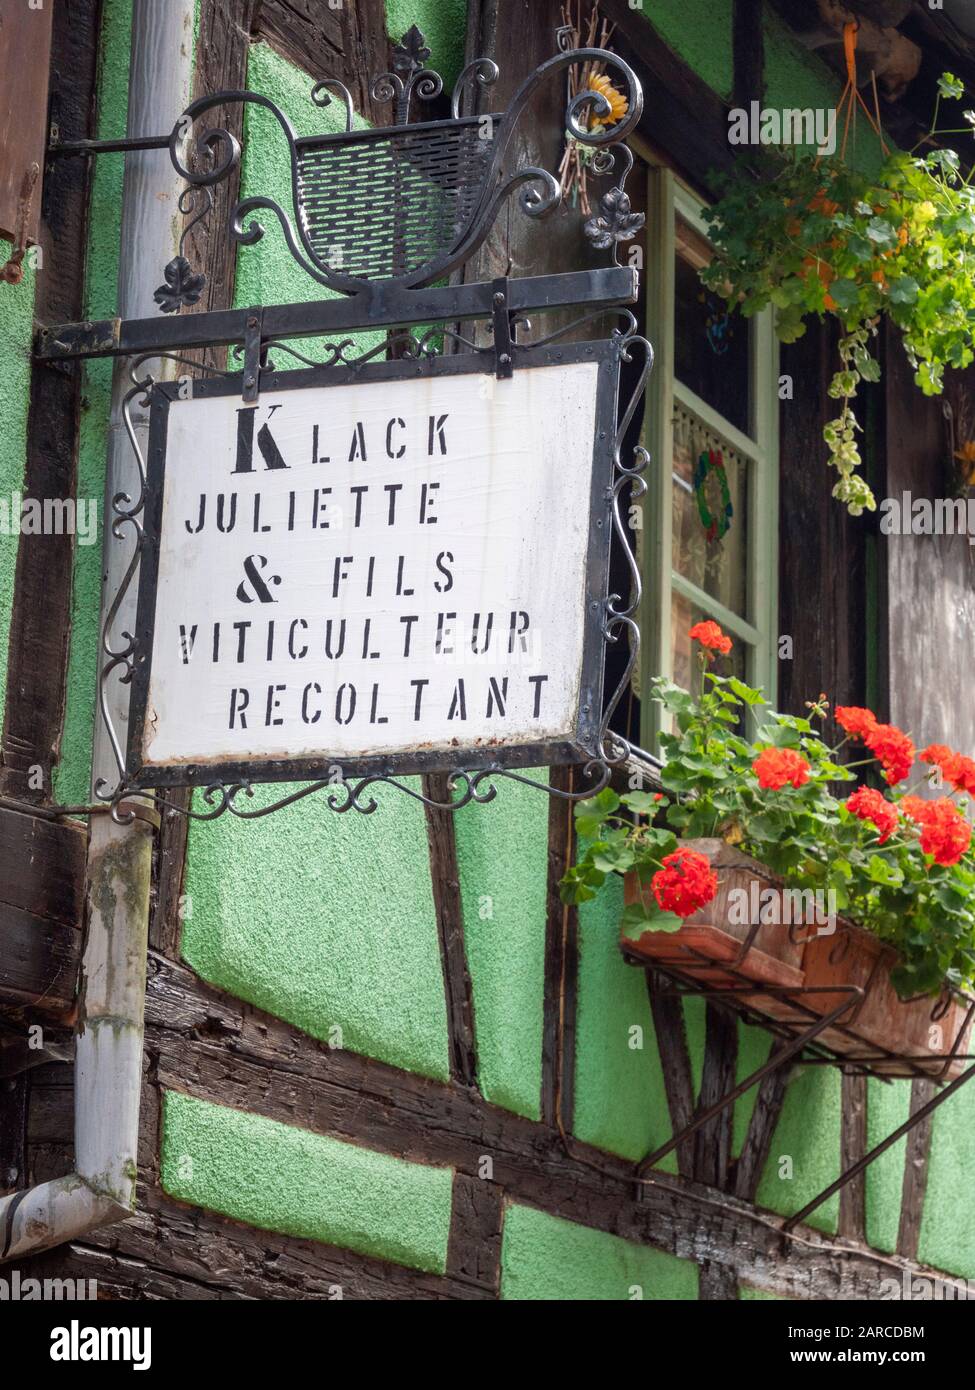 The traditional wrought iron sign at the Klack Juliette and sons viticulture and recoltant wine shop in Riquewihr  Alsace France Stock Photo